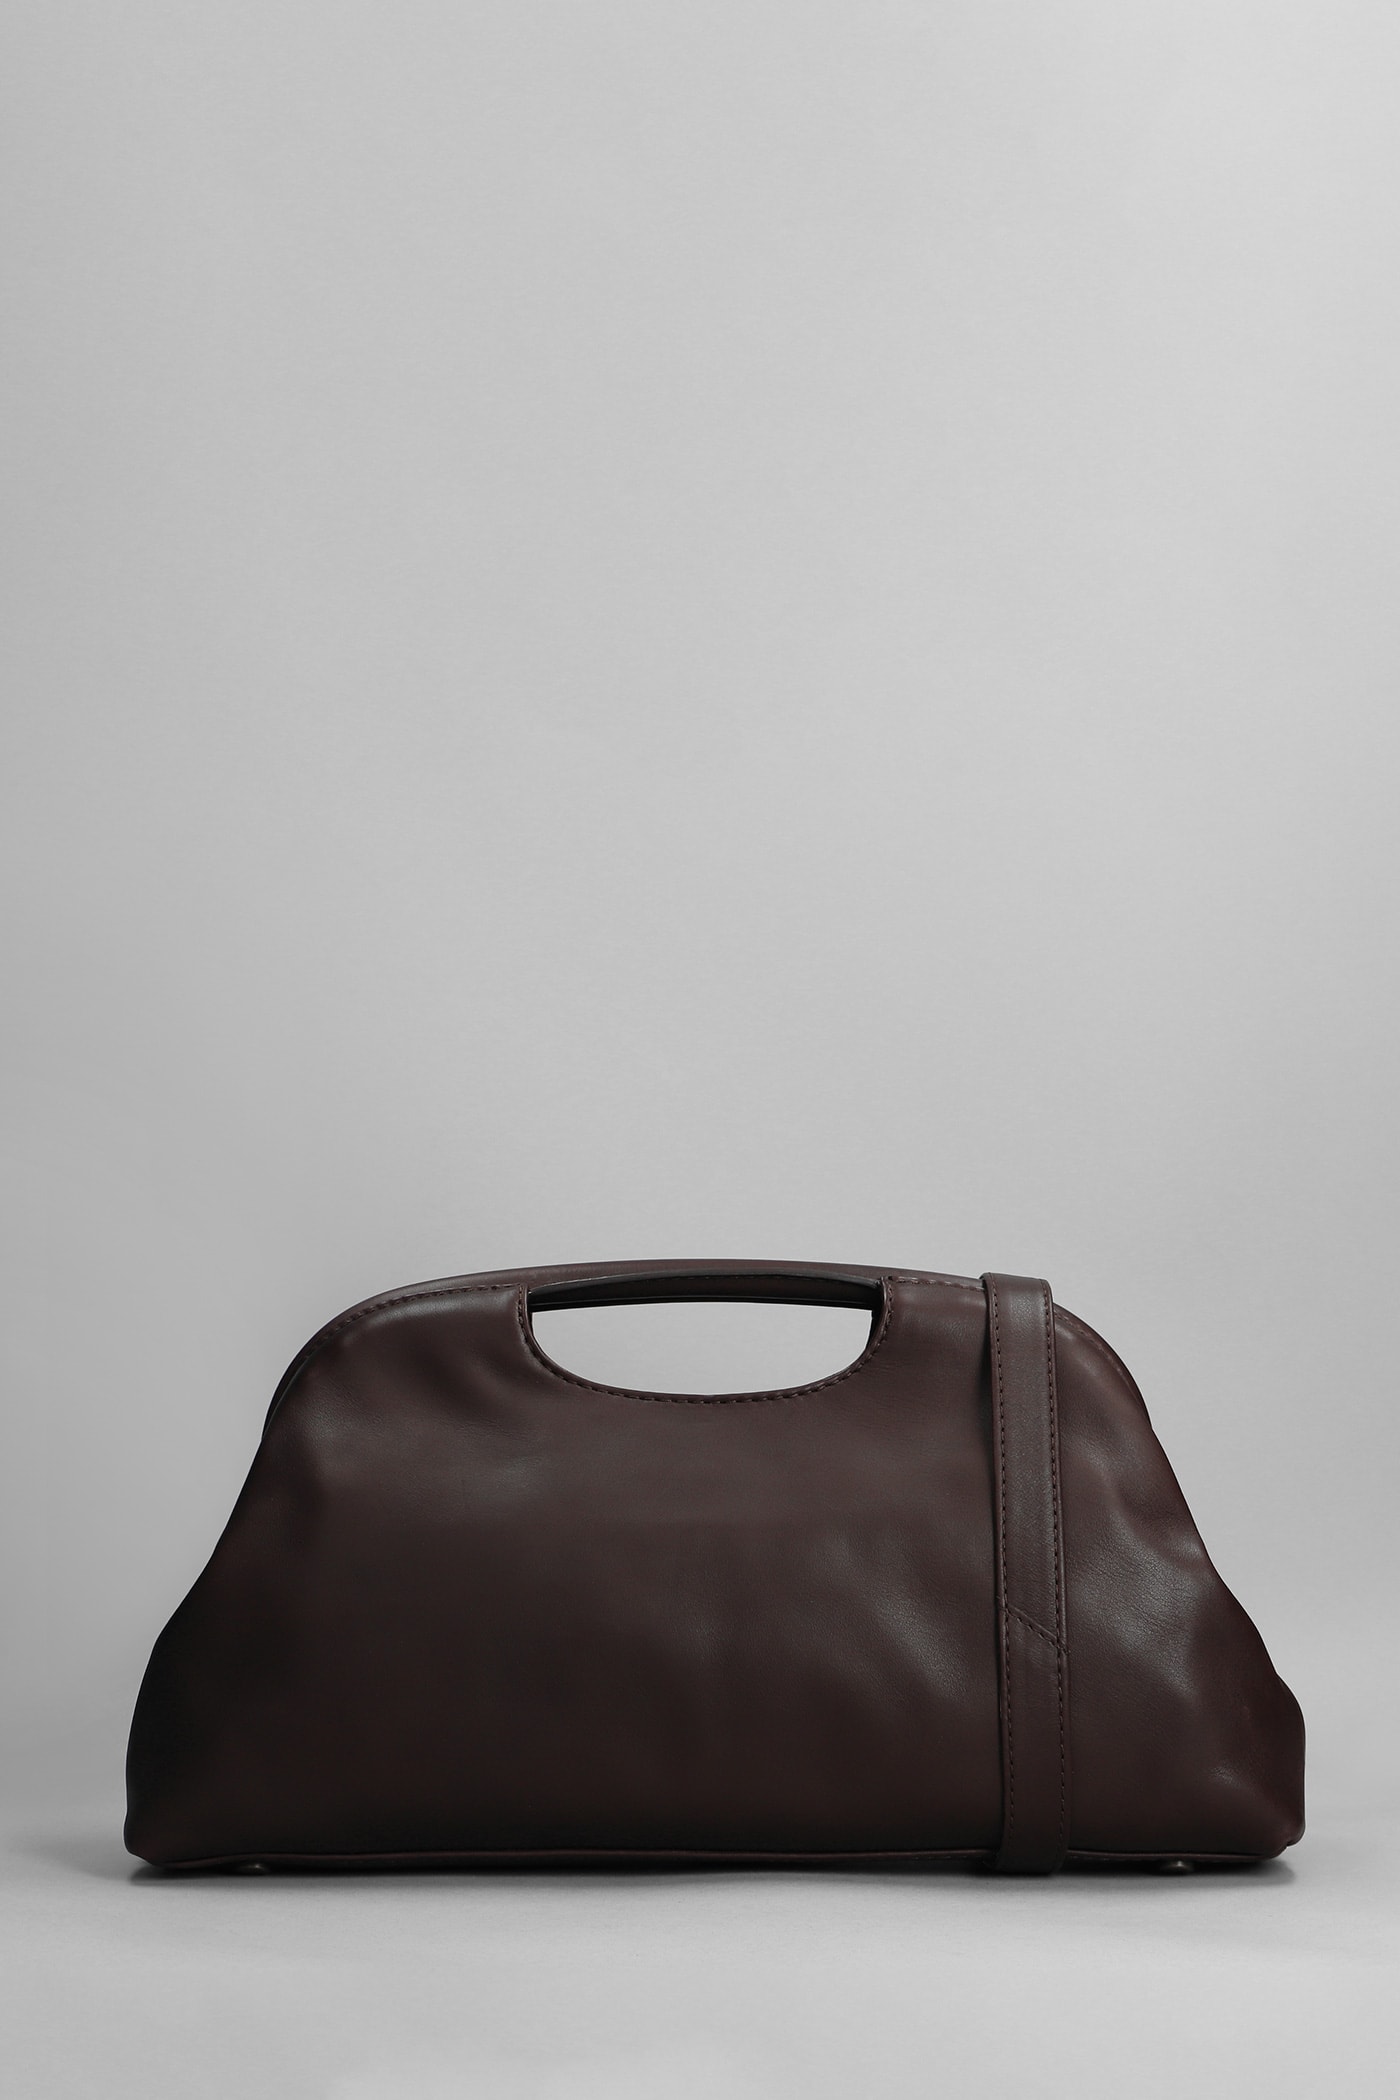 Officine Creative Helen 020 Hand Bag In Bordeaux Leather